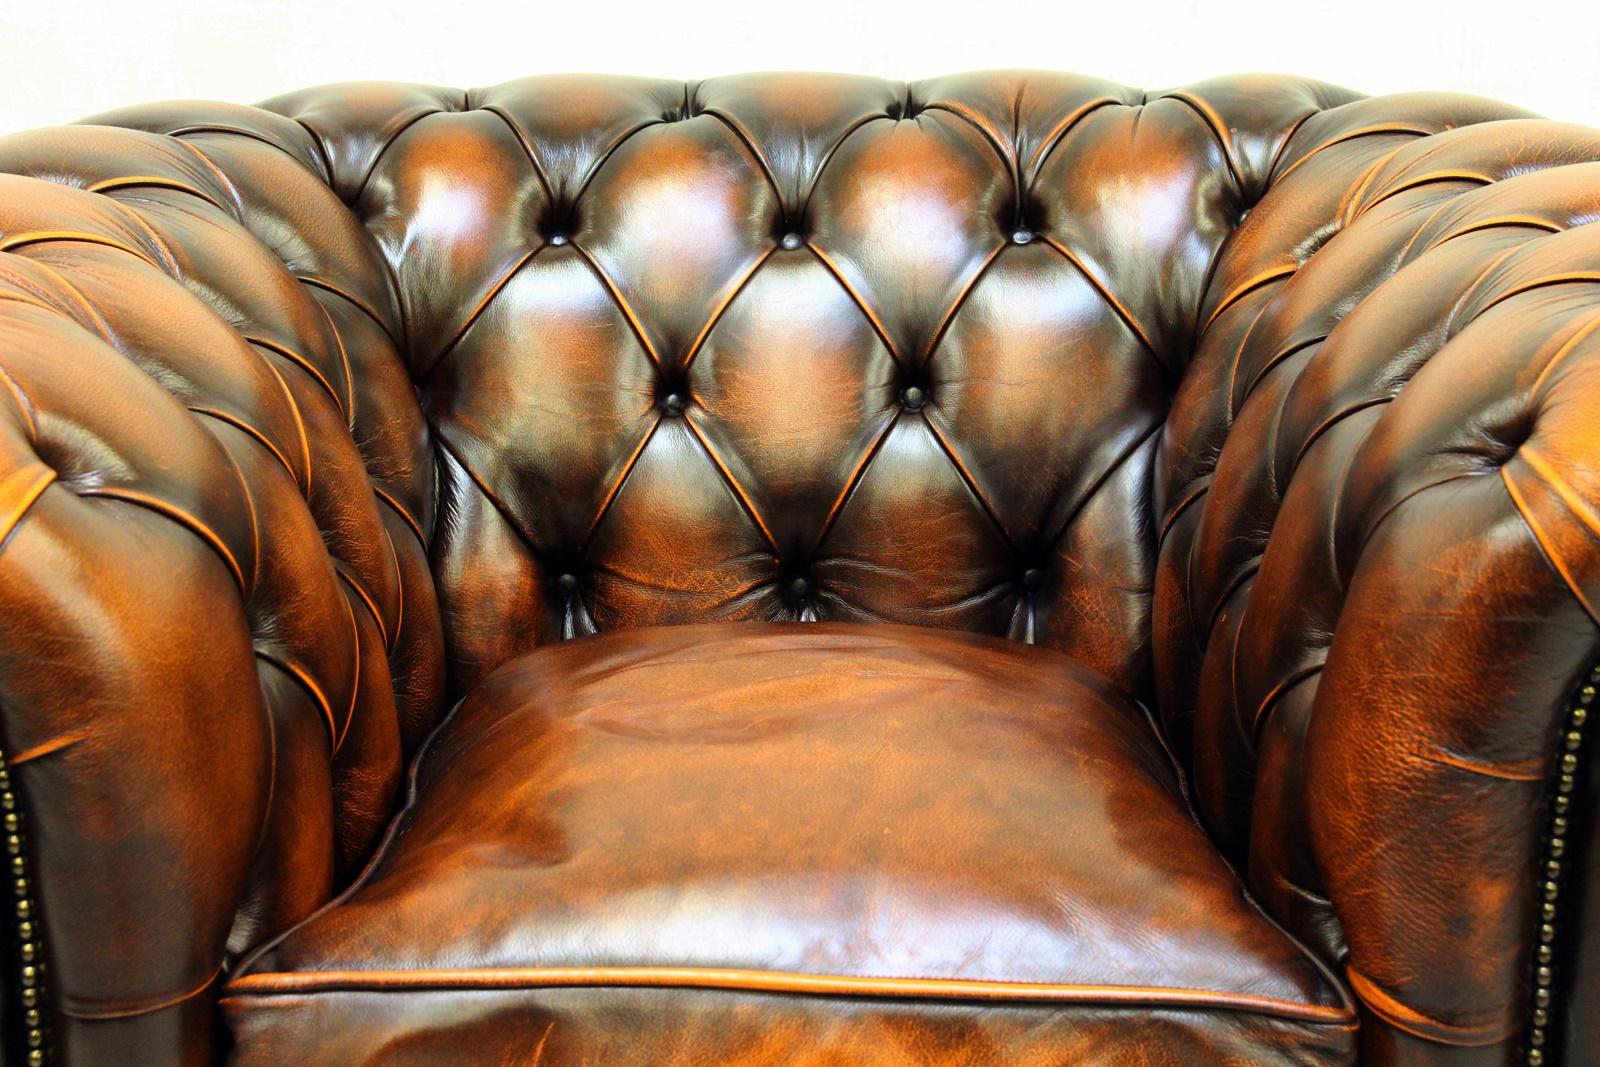 Chesterfield armchair extra large
The shape is classic
Armchair
Measures: Height x 80cm, width x 115cm, depth x 95cm
Color: brown
Pillows: down pillows
Condition: The chair is in a very good condition for the age and still has the charm of the